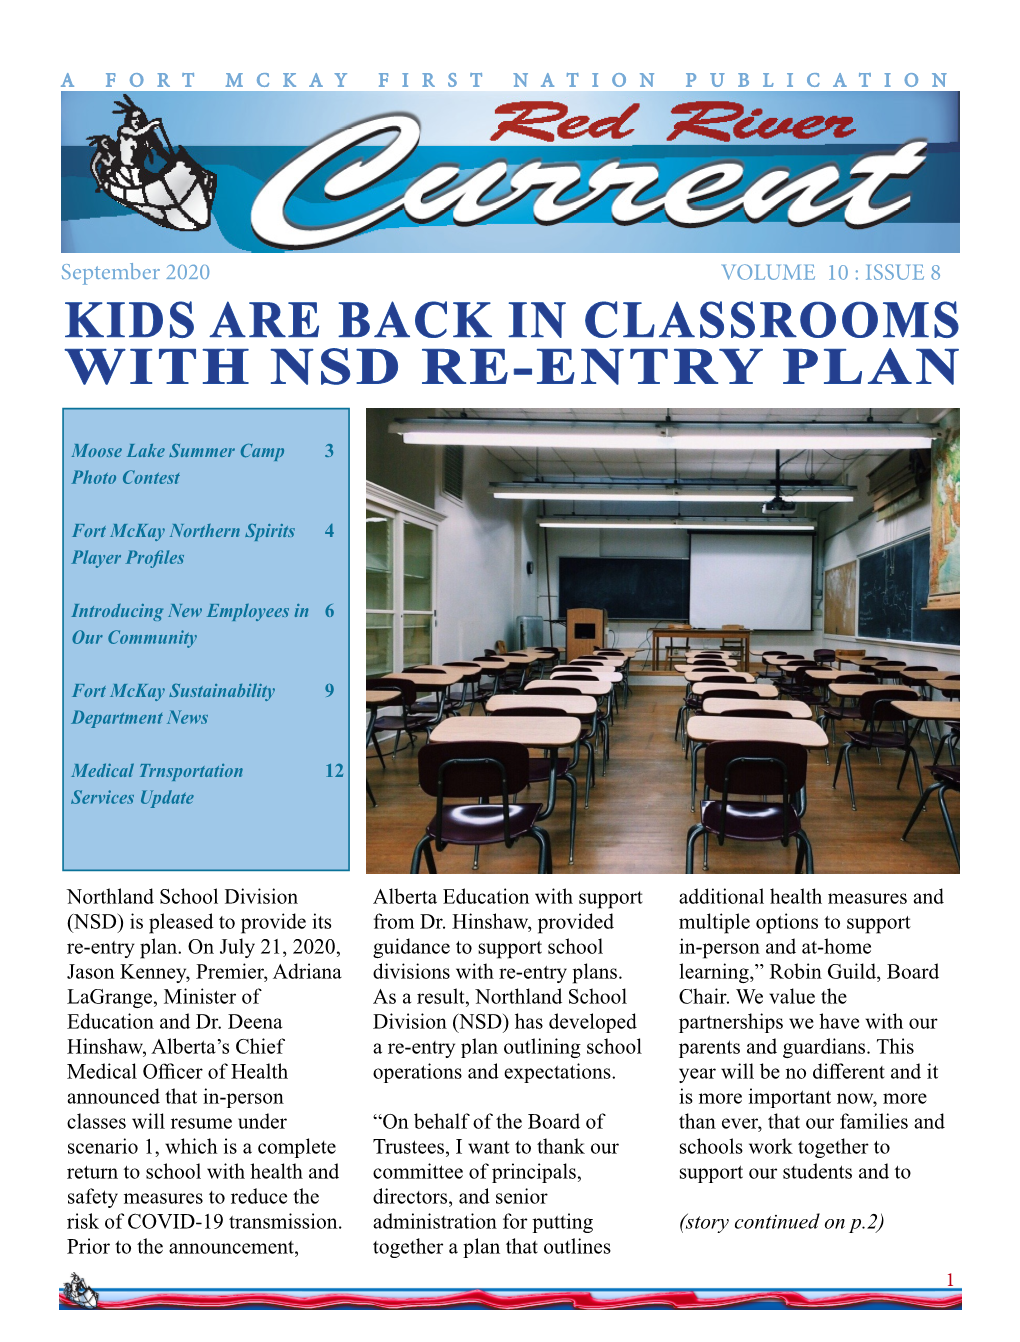 Kids Are Back in Classrooms with Nsd Re-Entry Plan